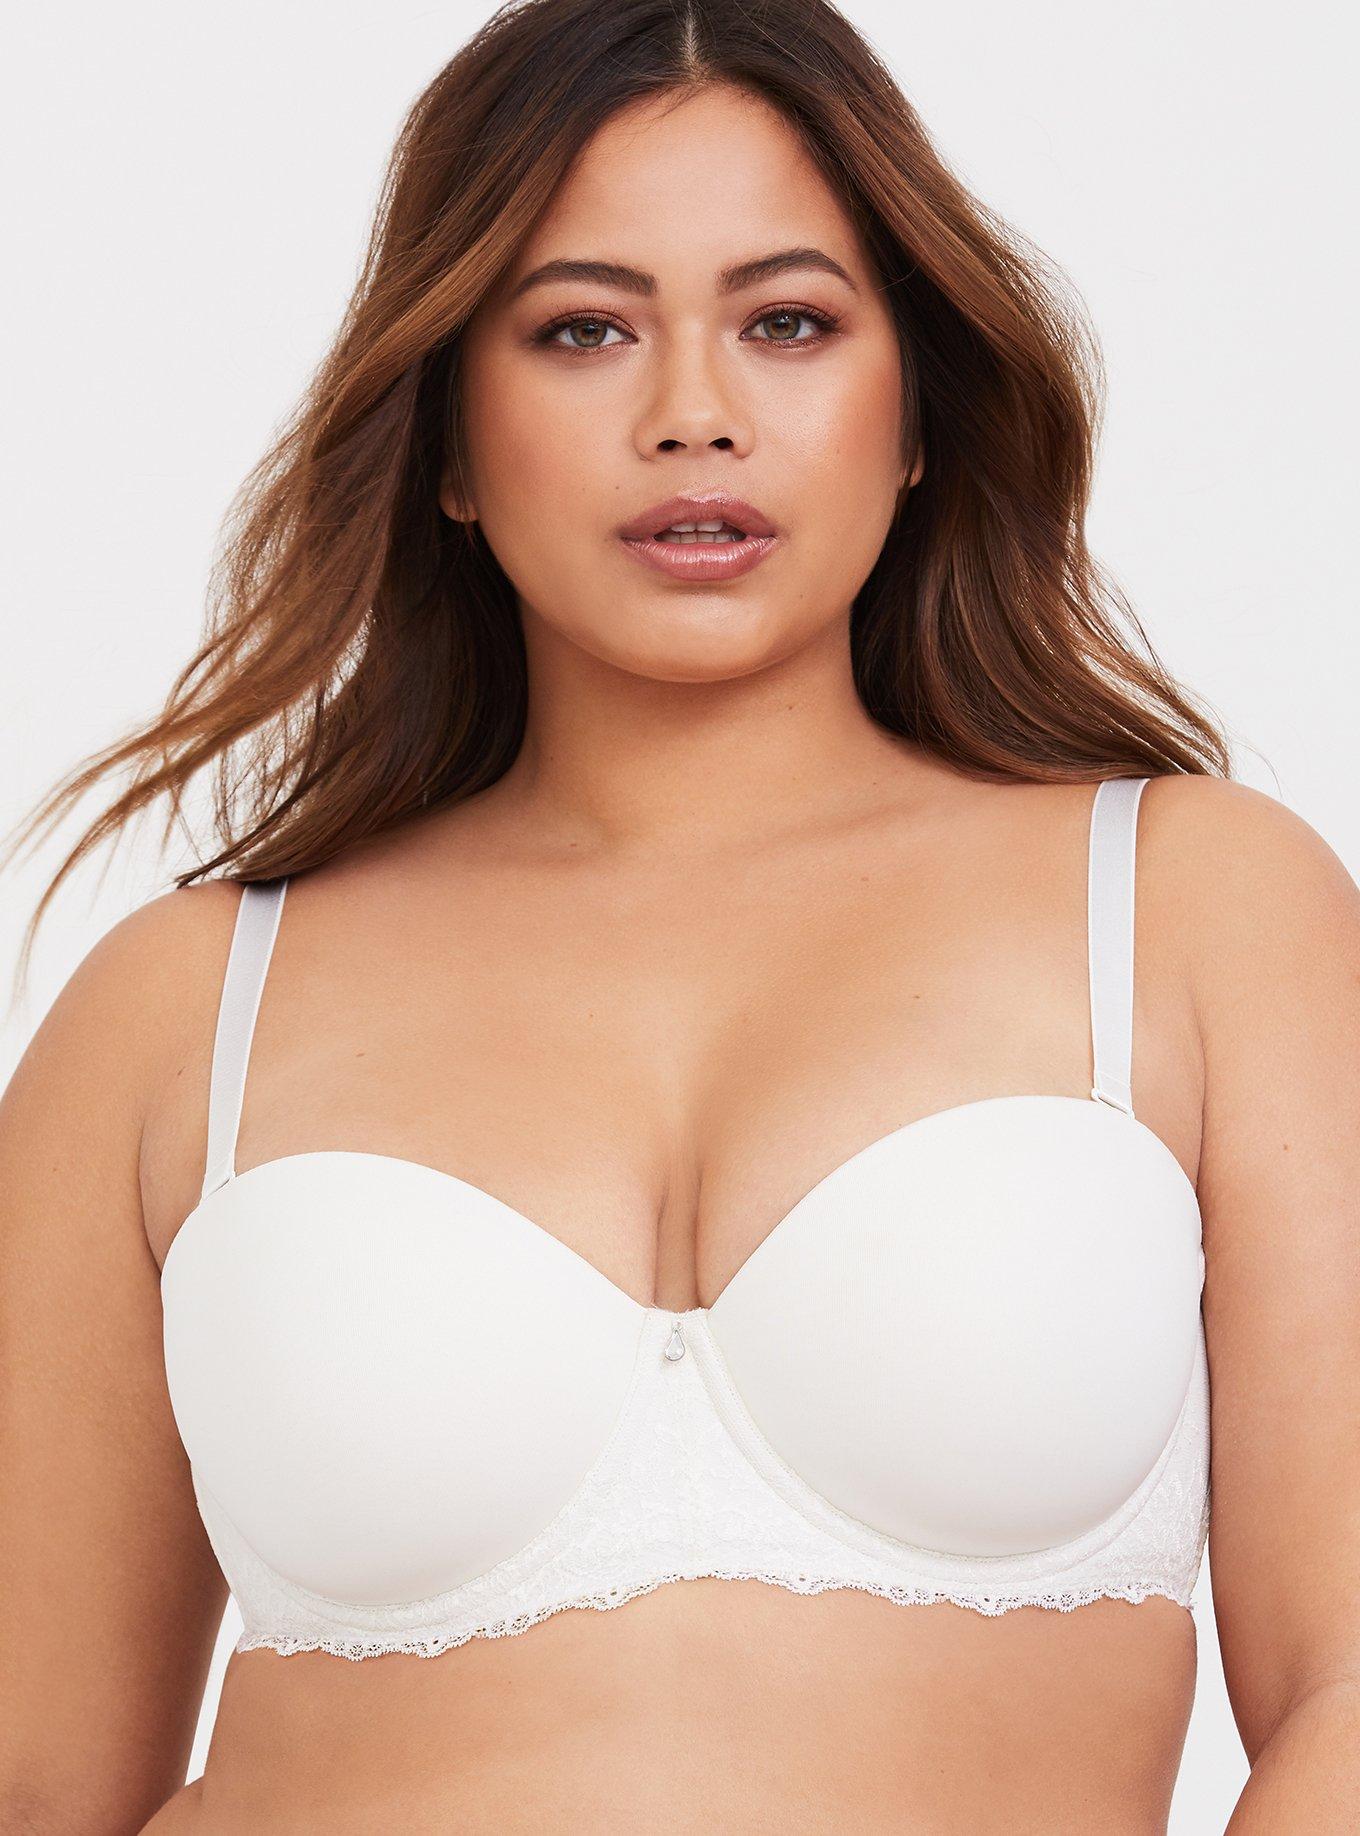 Torrid Curves Size 40DD Strapless Push-Up Bra Two Tone Lace Deep